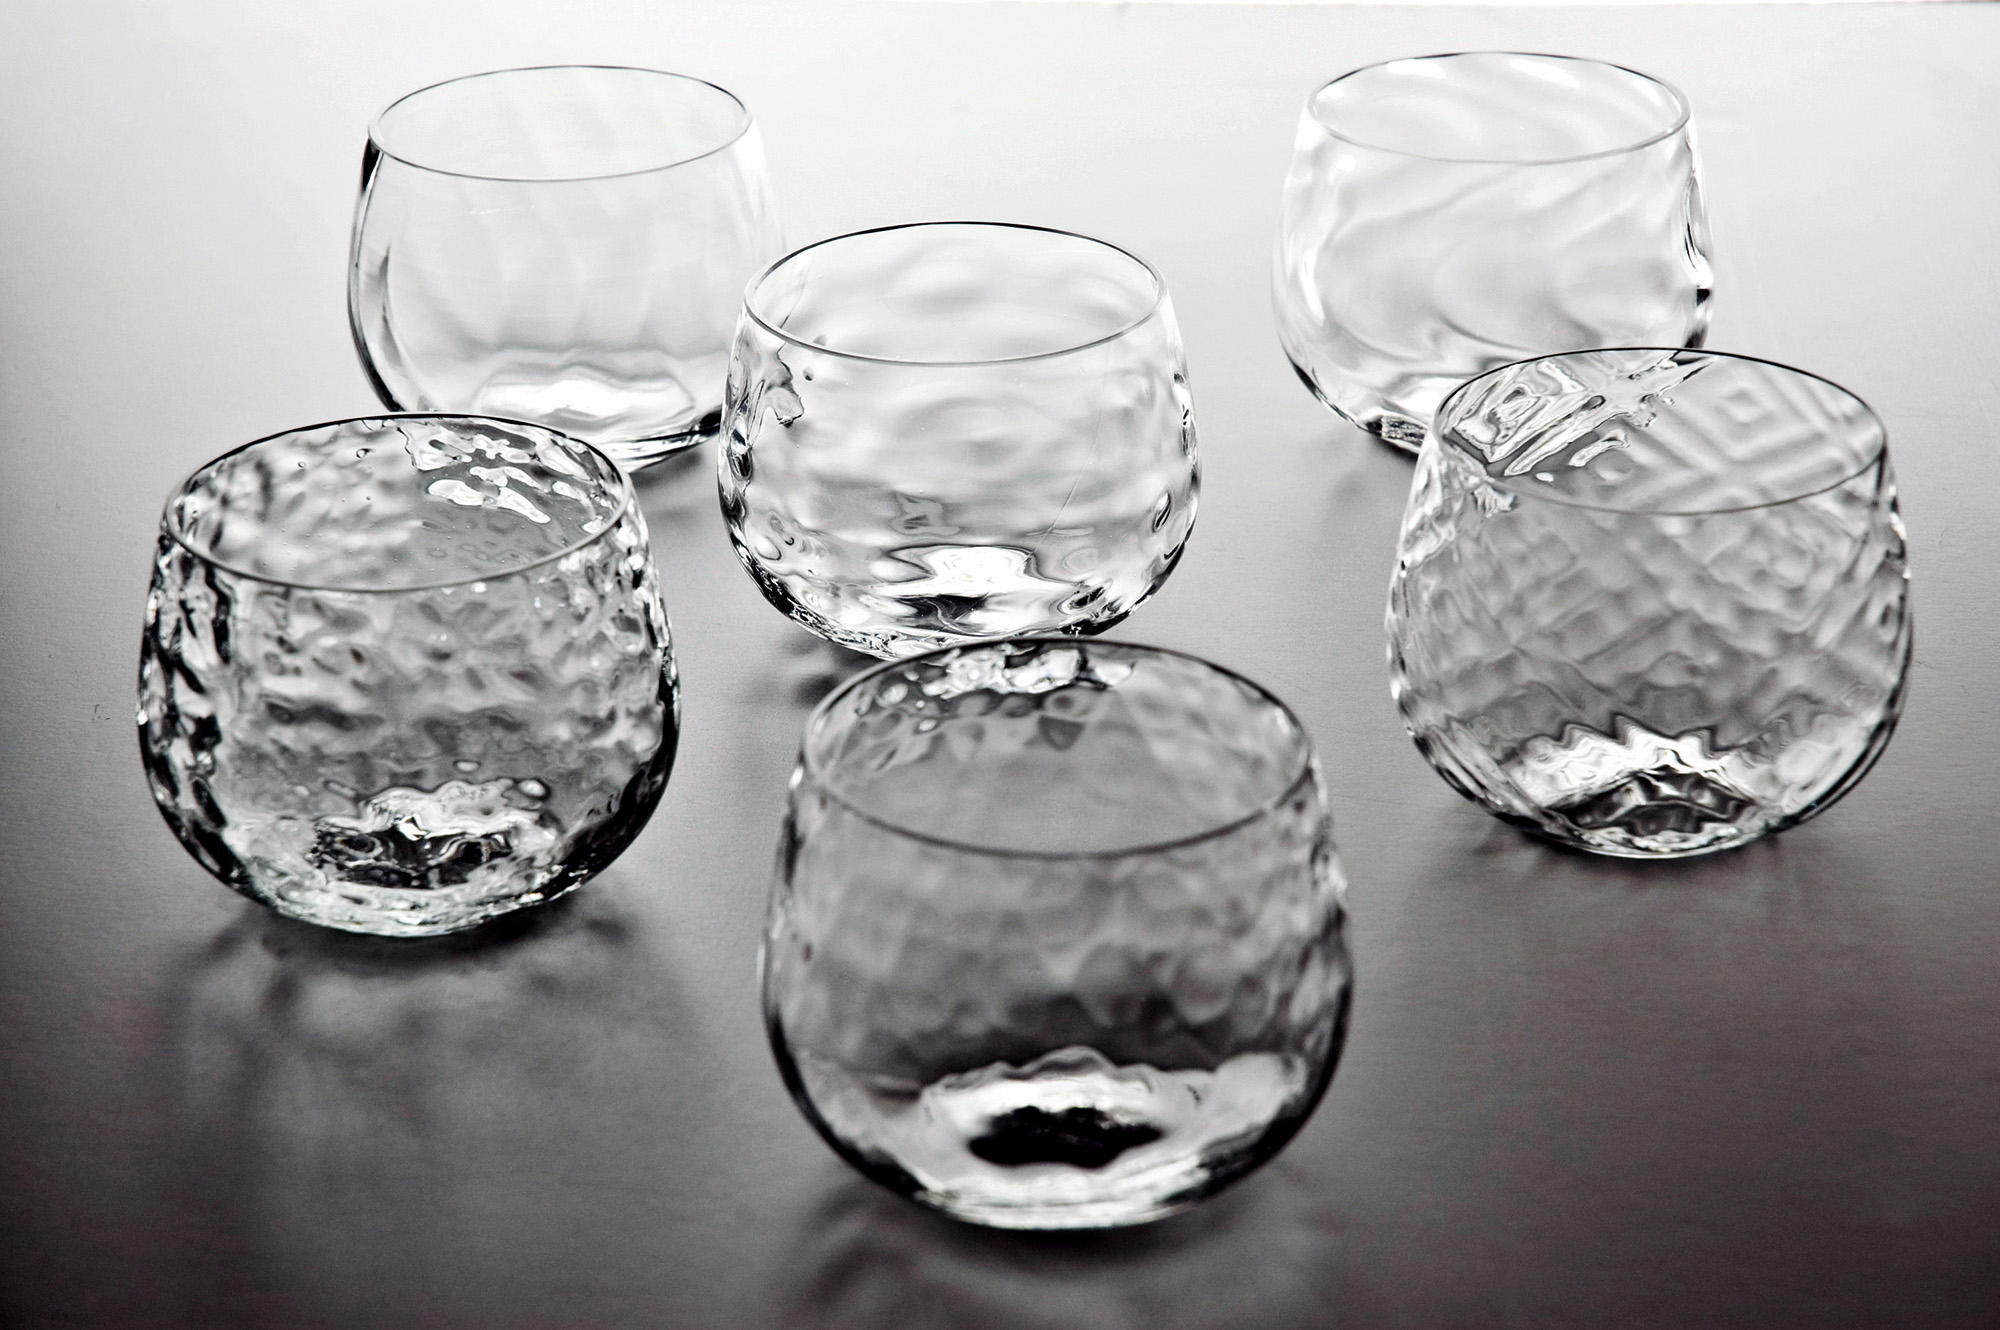 Prudence Clear Stemless Wine Glass